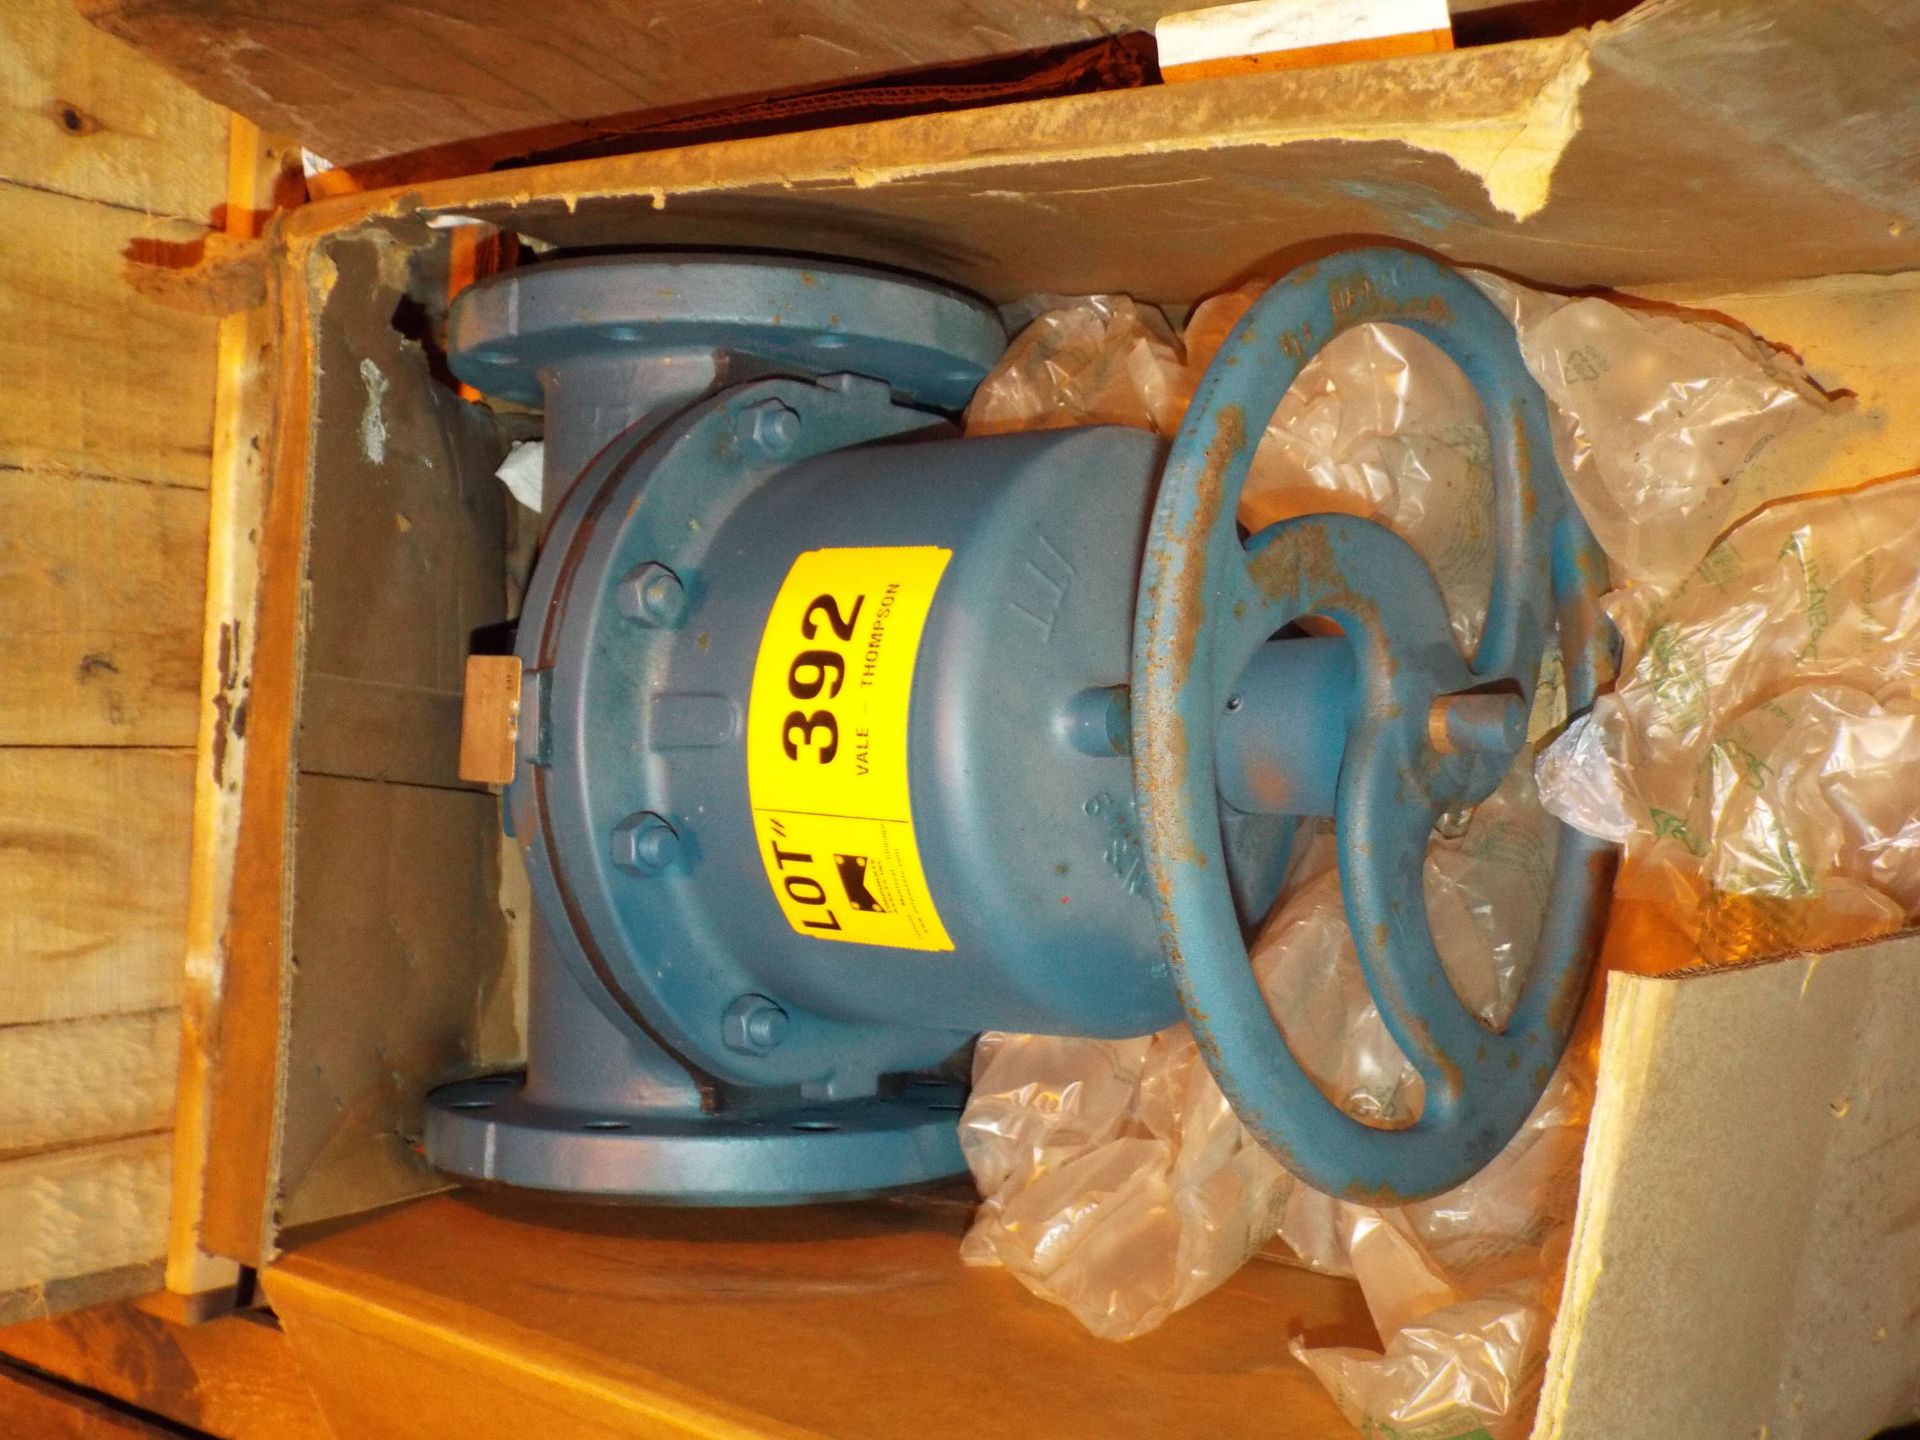 LOT/ CONTENTS OF SKID - (1) 6" FLANGED VALE, (1) DIAPHRAGM VALVE, (1) STRAIGHTWAY VALVE